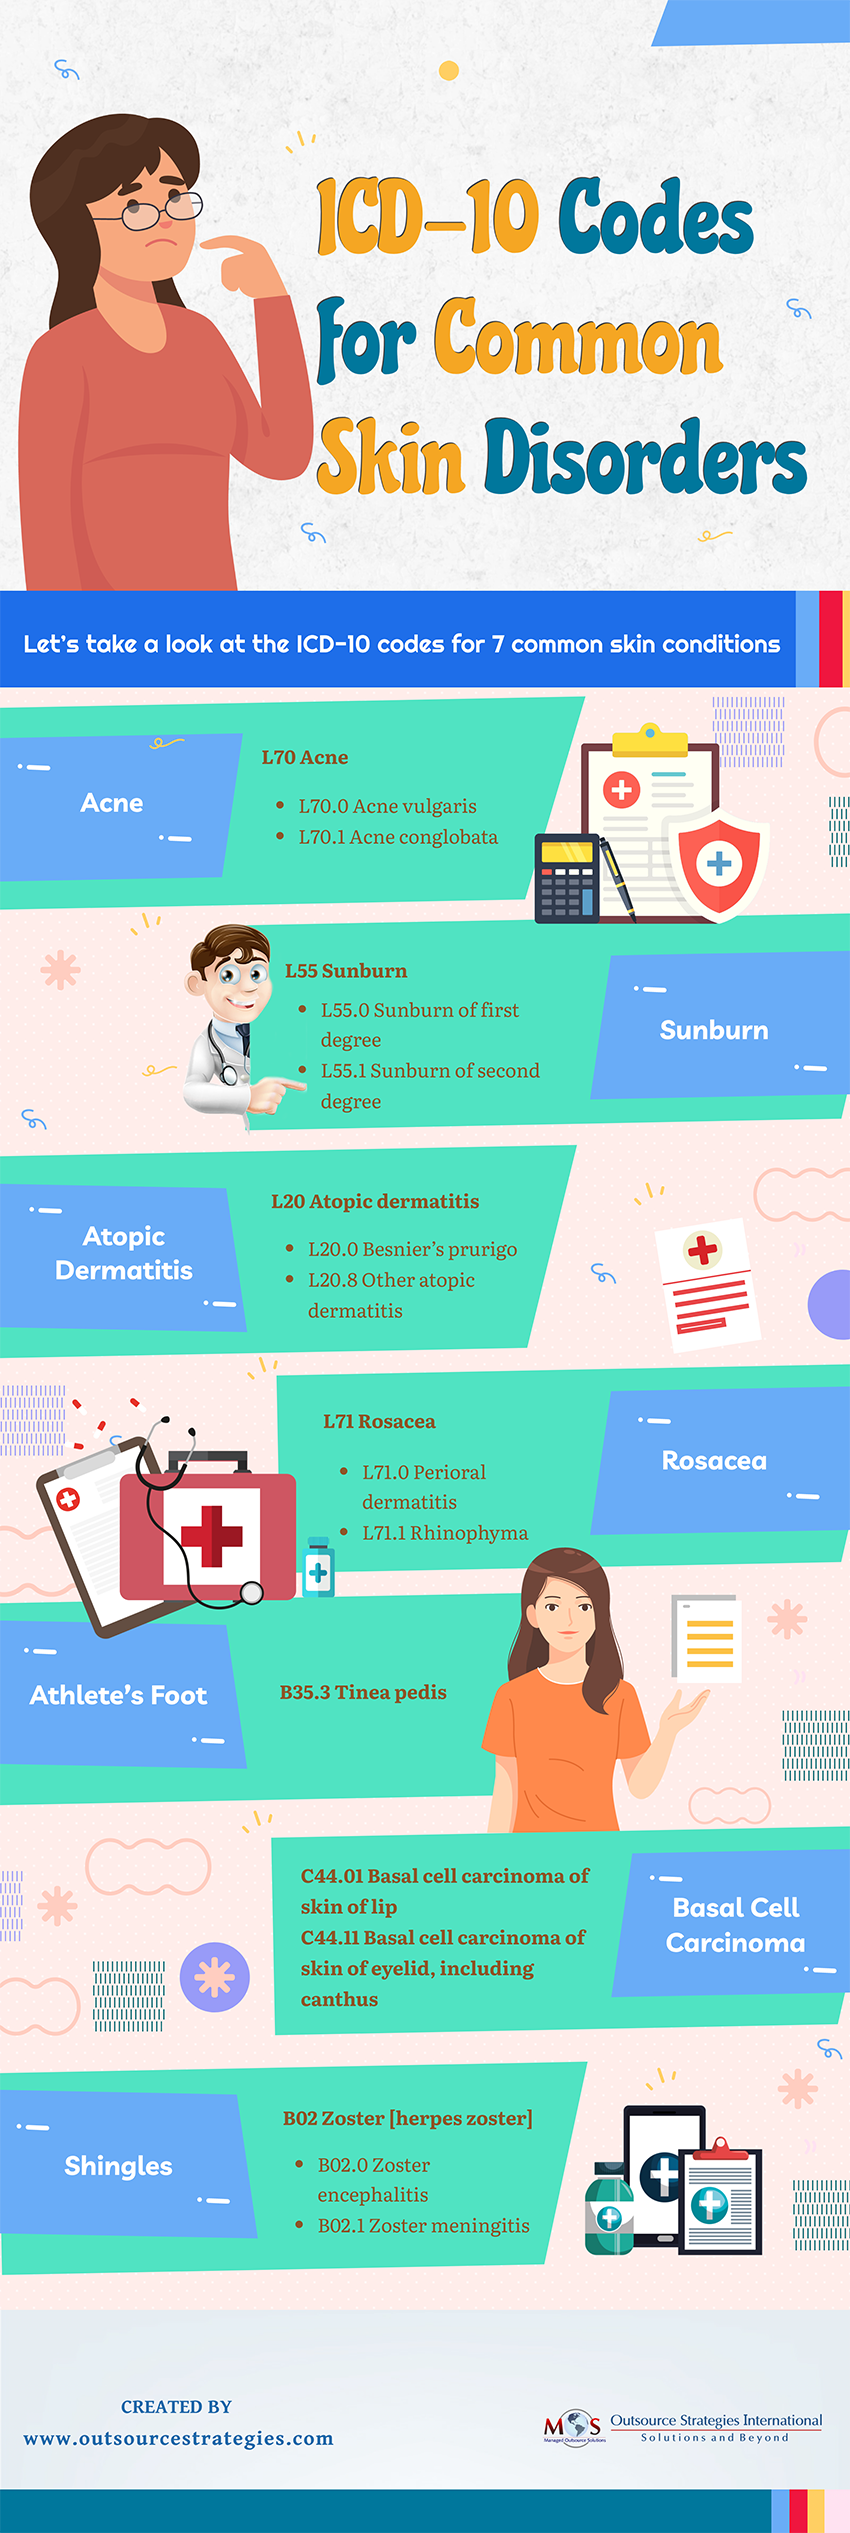 ICD-10 Codes for Common Skin Disorders